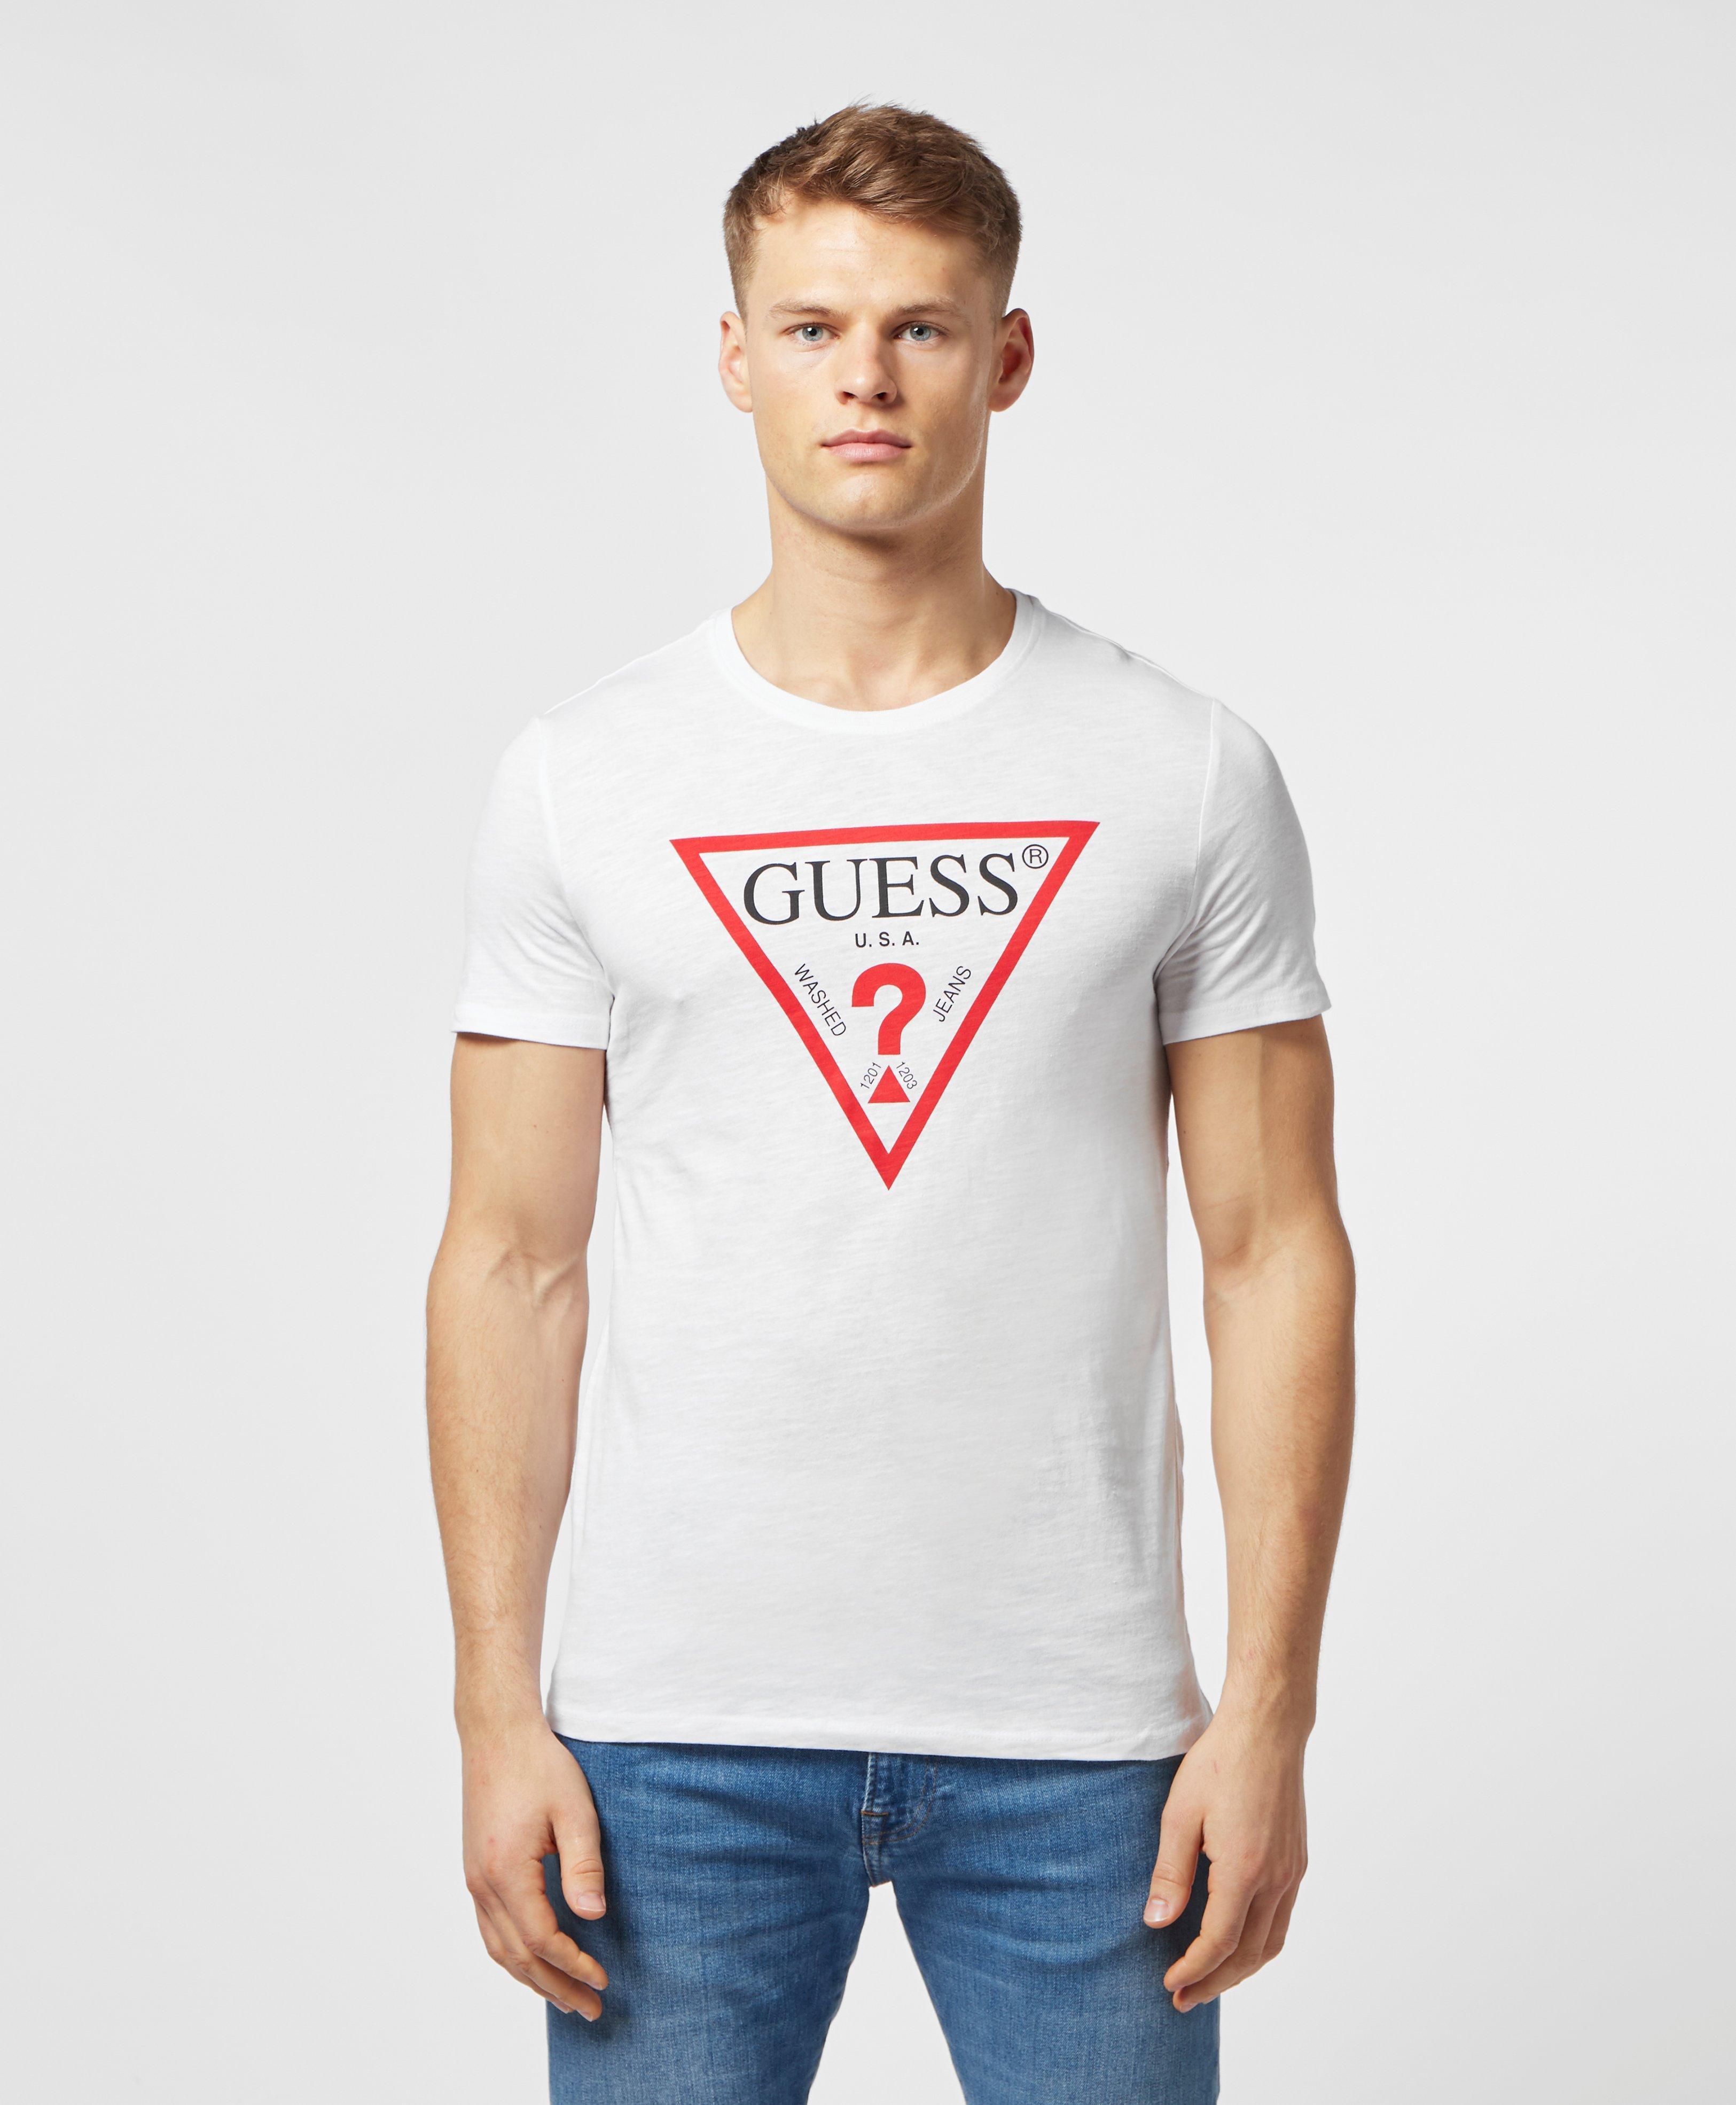 Guess Core Tri Logo Short Sleeve T-shirt in White for Men - Lyst